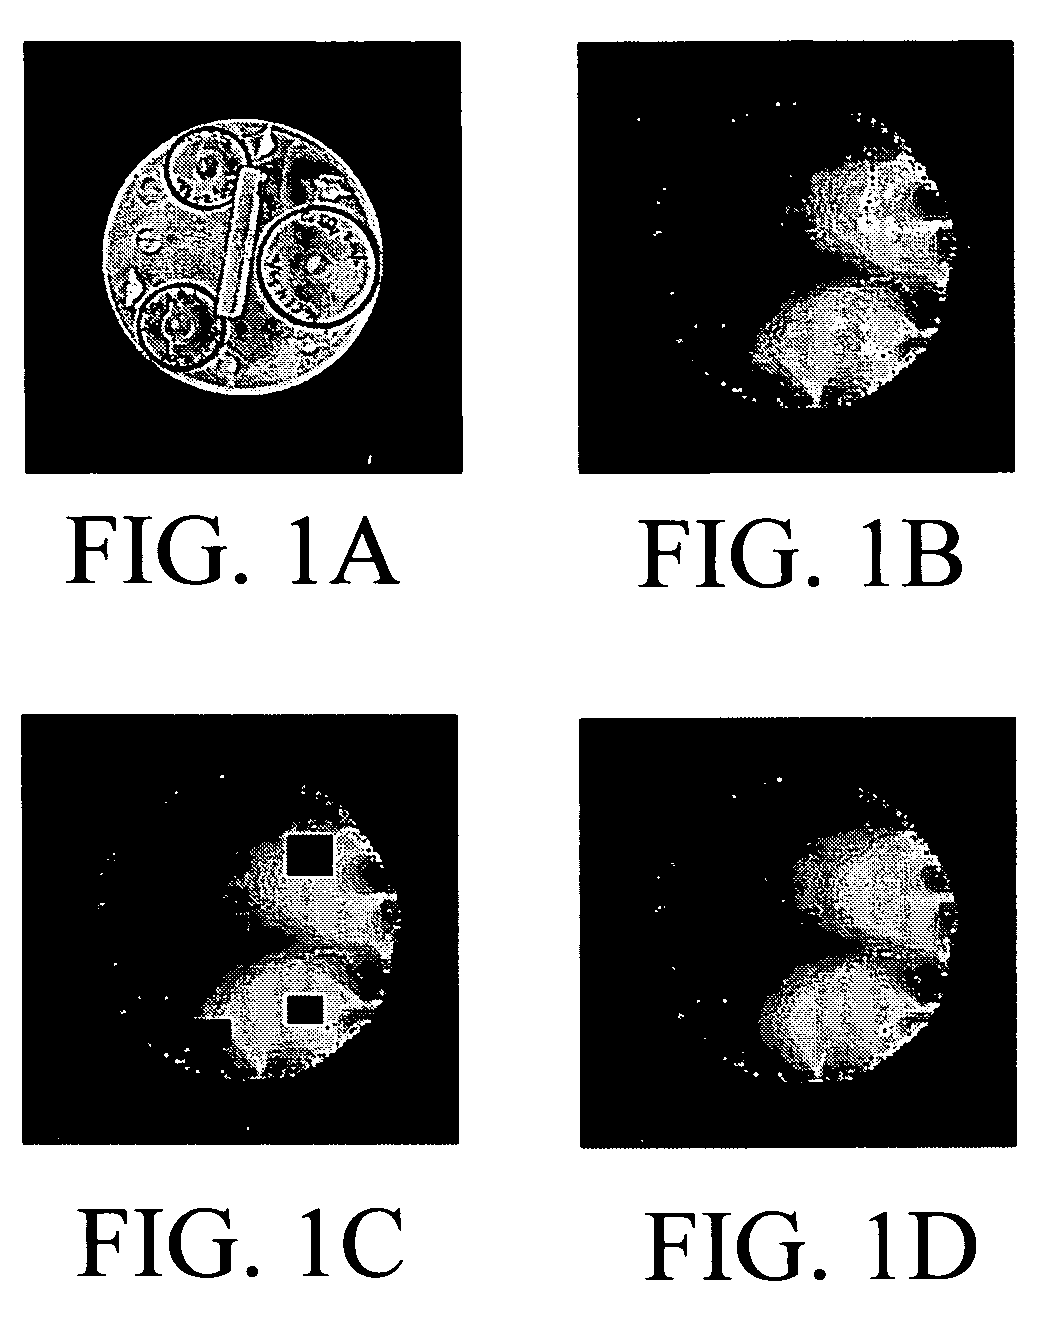 Method for applying an in-painting technique to correct images in parallel imaging